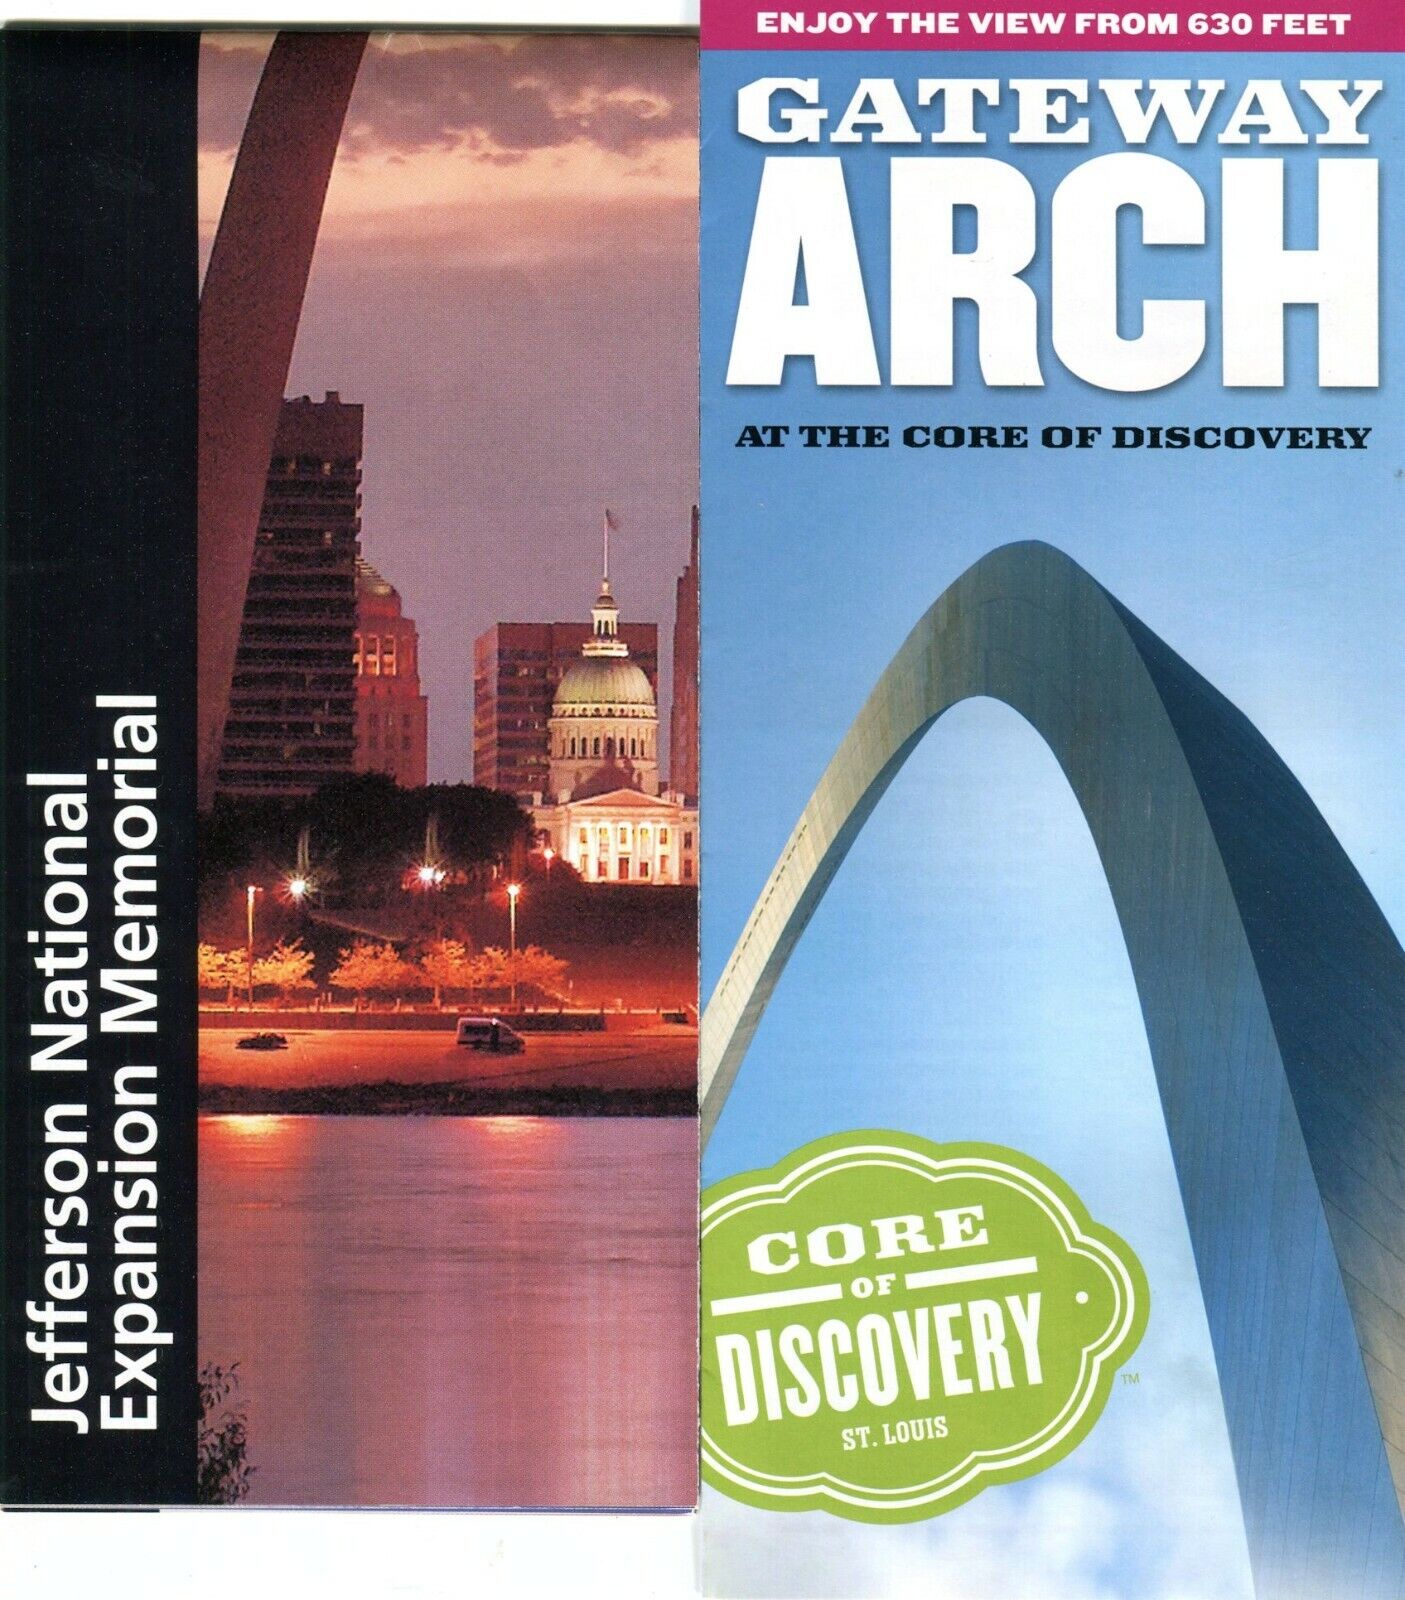 2008 St. Louis Gateway Arch Ephemera Jumbo Fold Out Poster Suitable For Framing